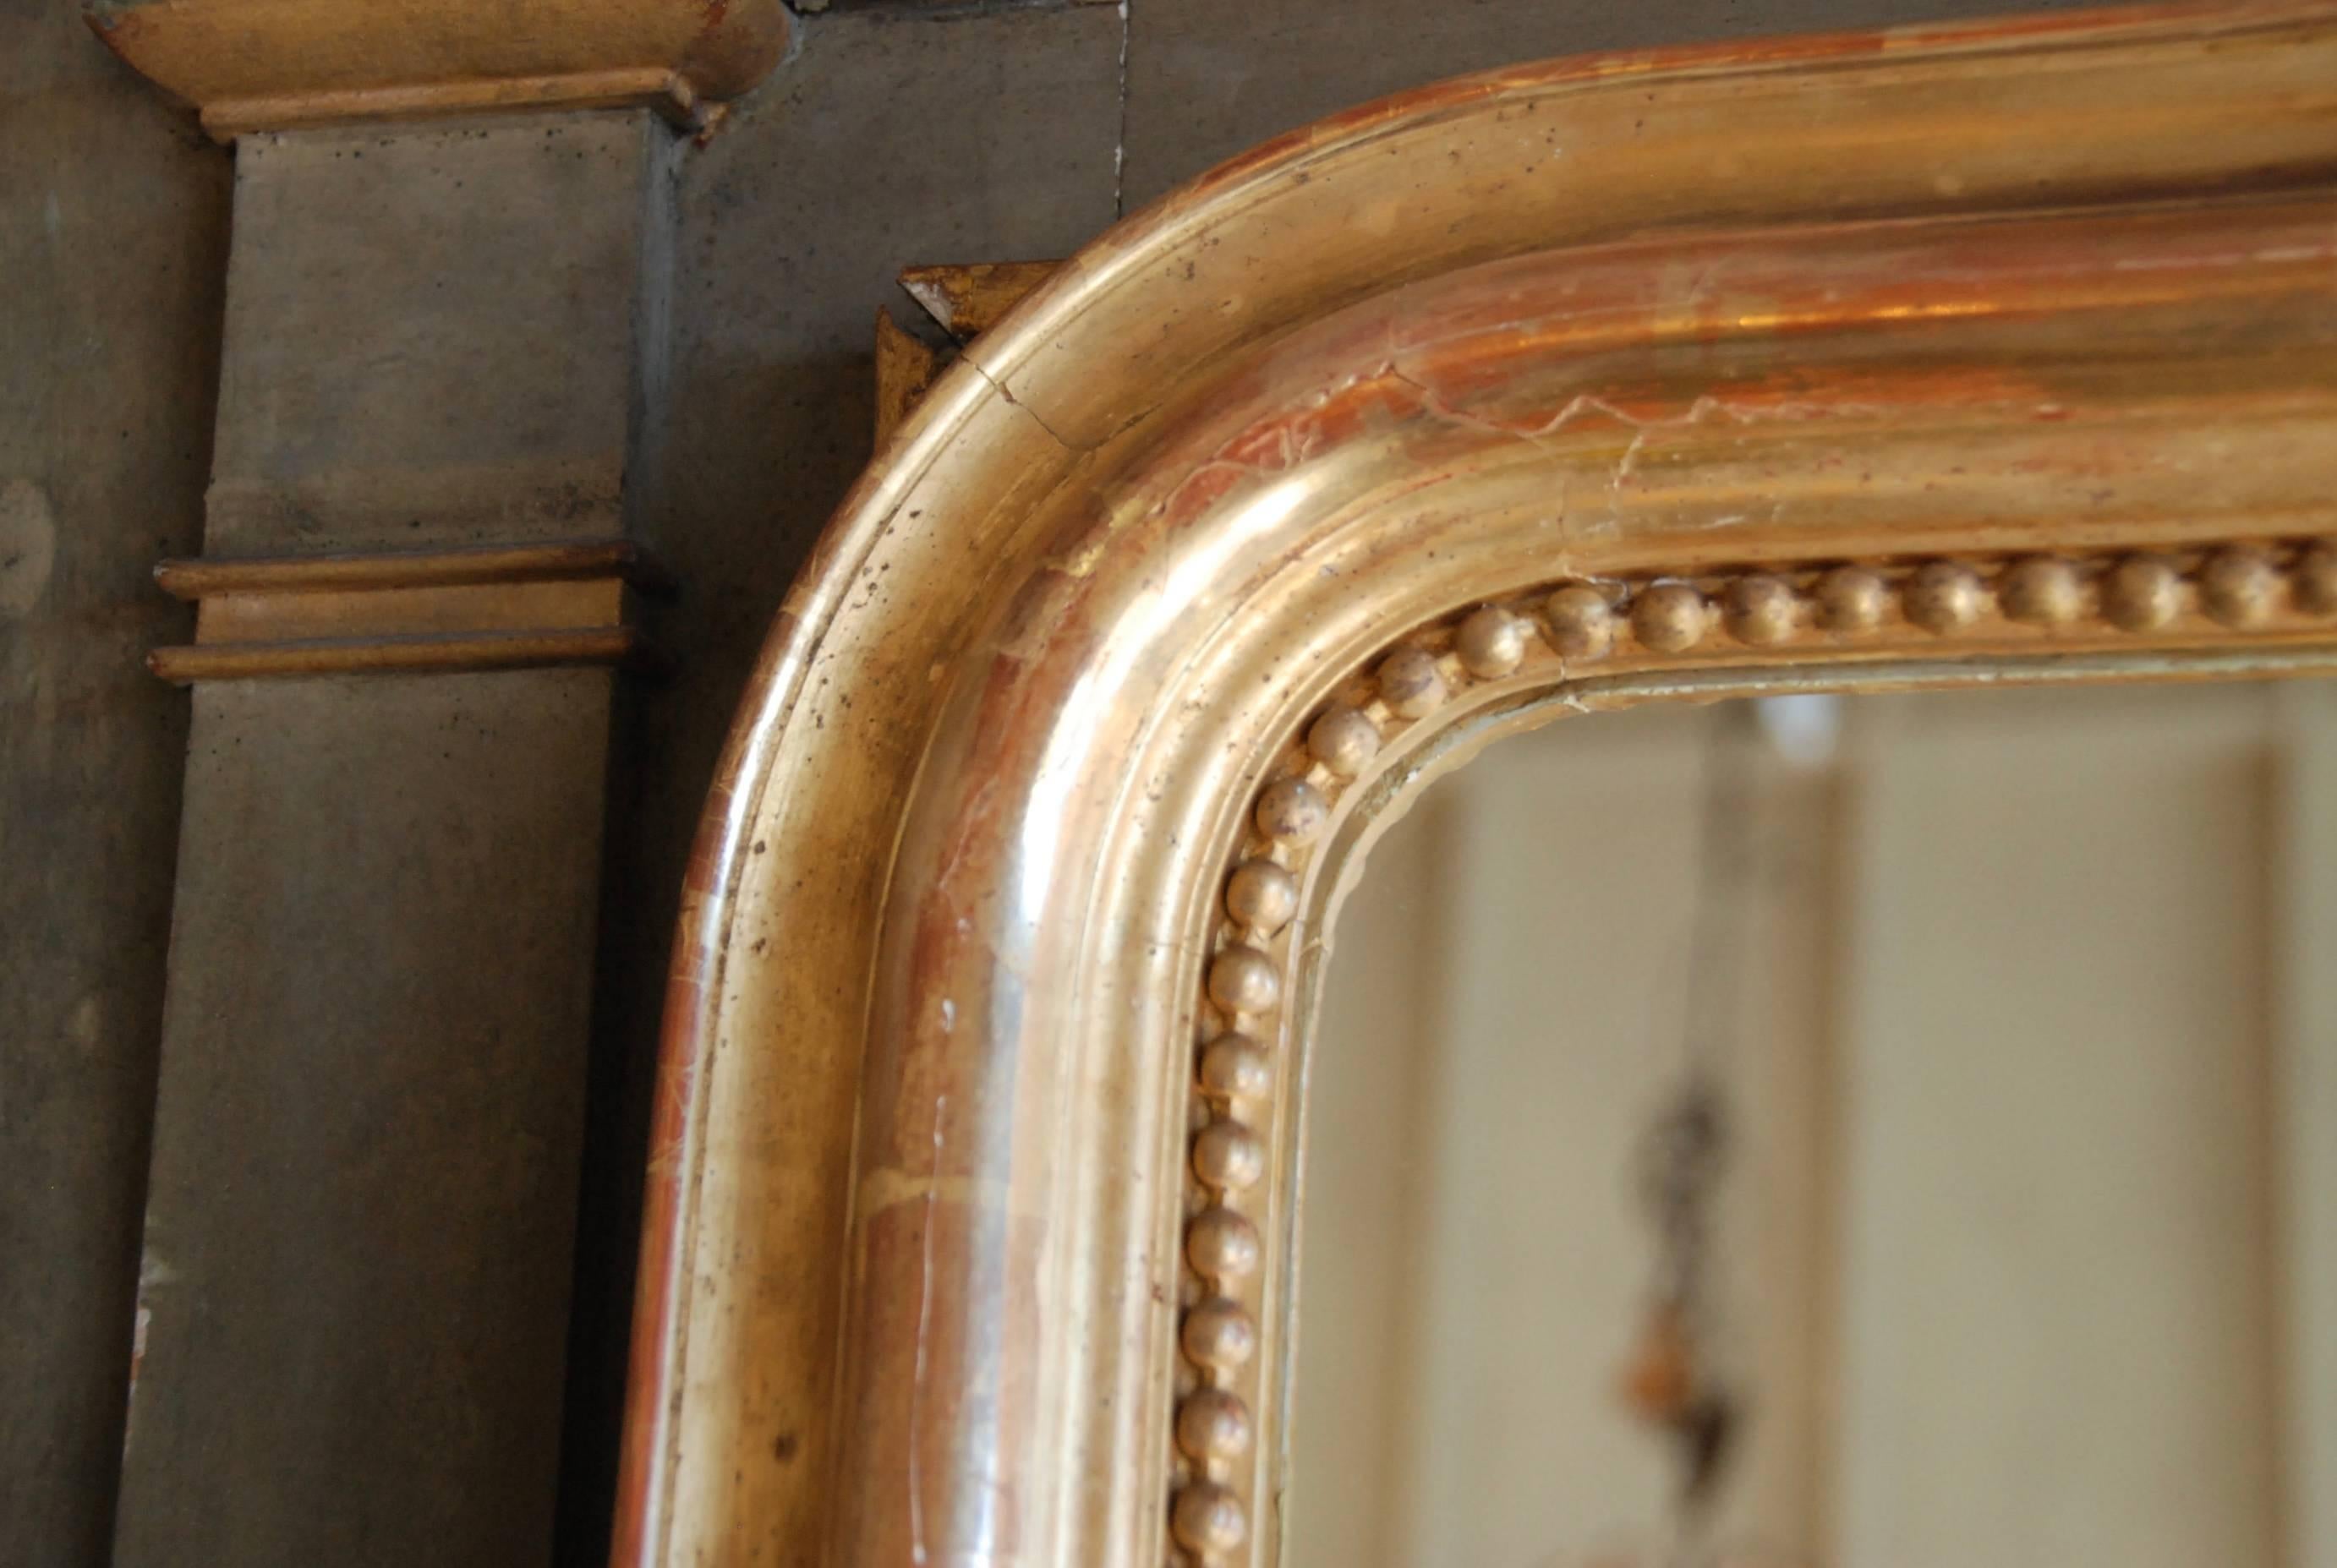 Beautiful 19th century French Louis Philippe mirror fully restored with new glass, Paris, France.